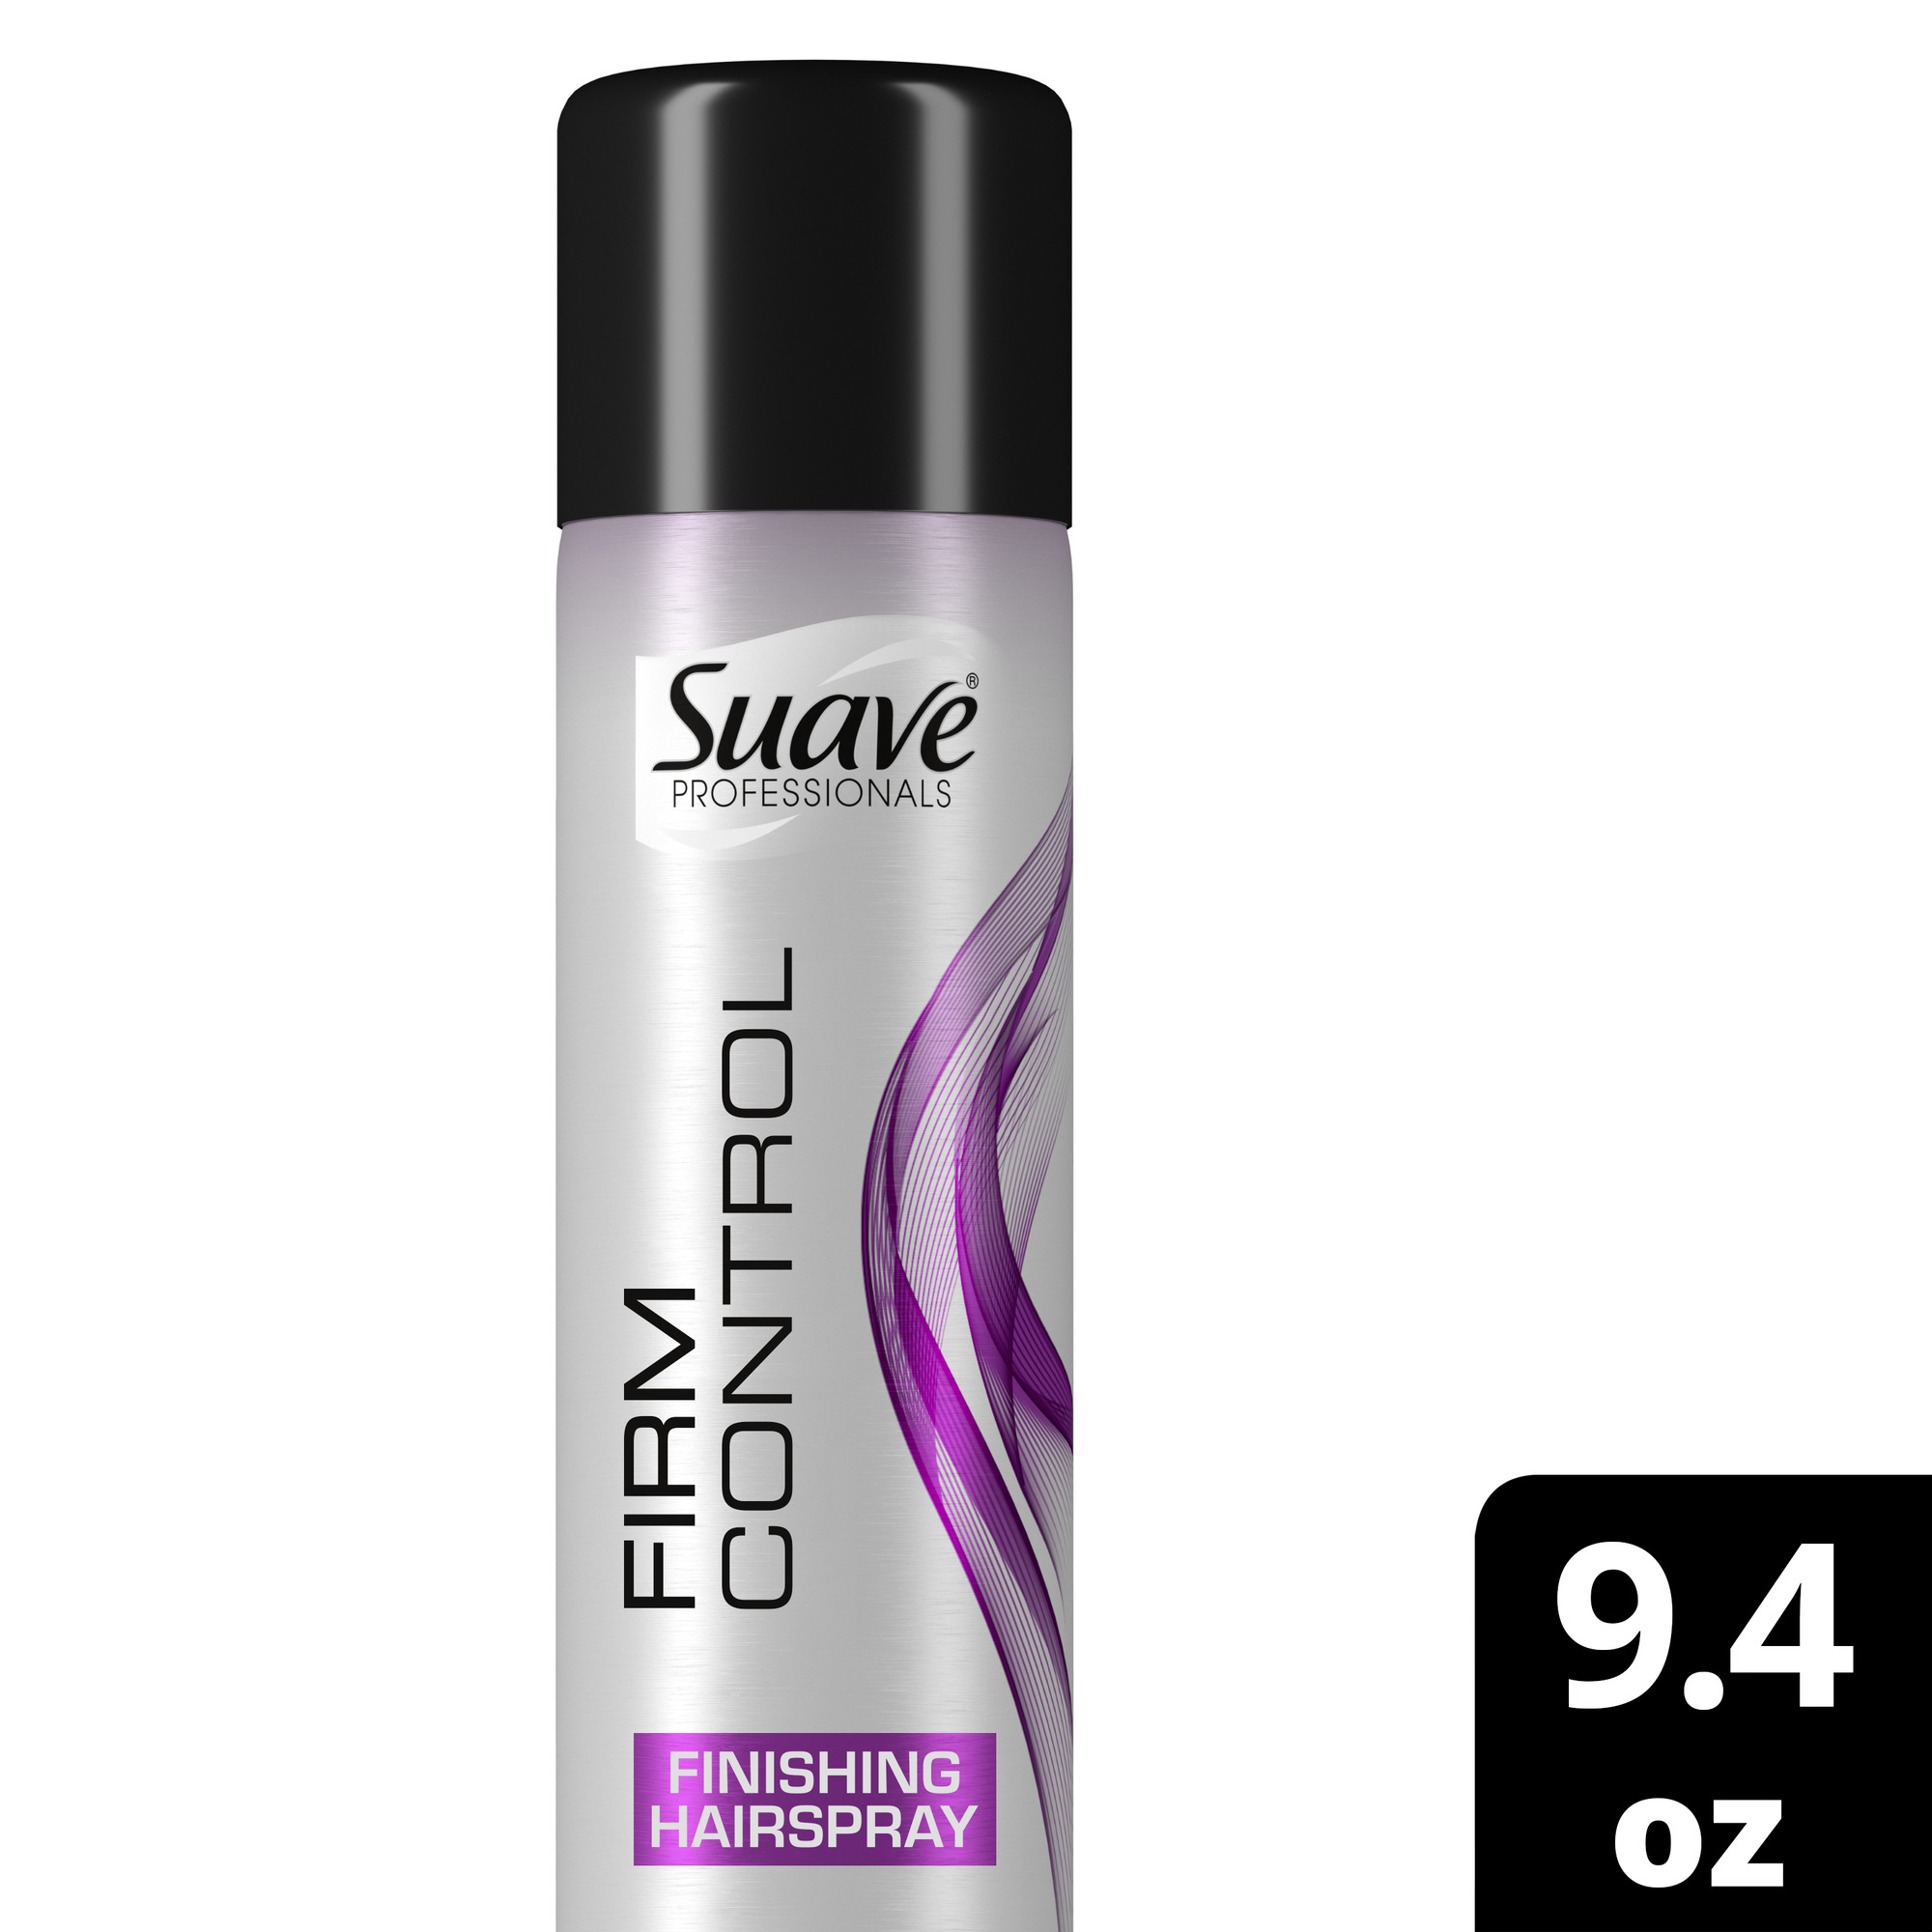 Suave Professionals Hairspray Firm Control Finishing and Hair Styling Hairspray&nbsp;9.4 oz&nbsp; - image 1 of 10